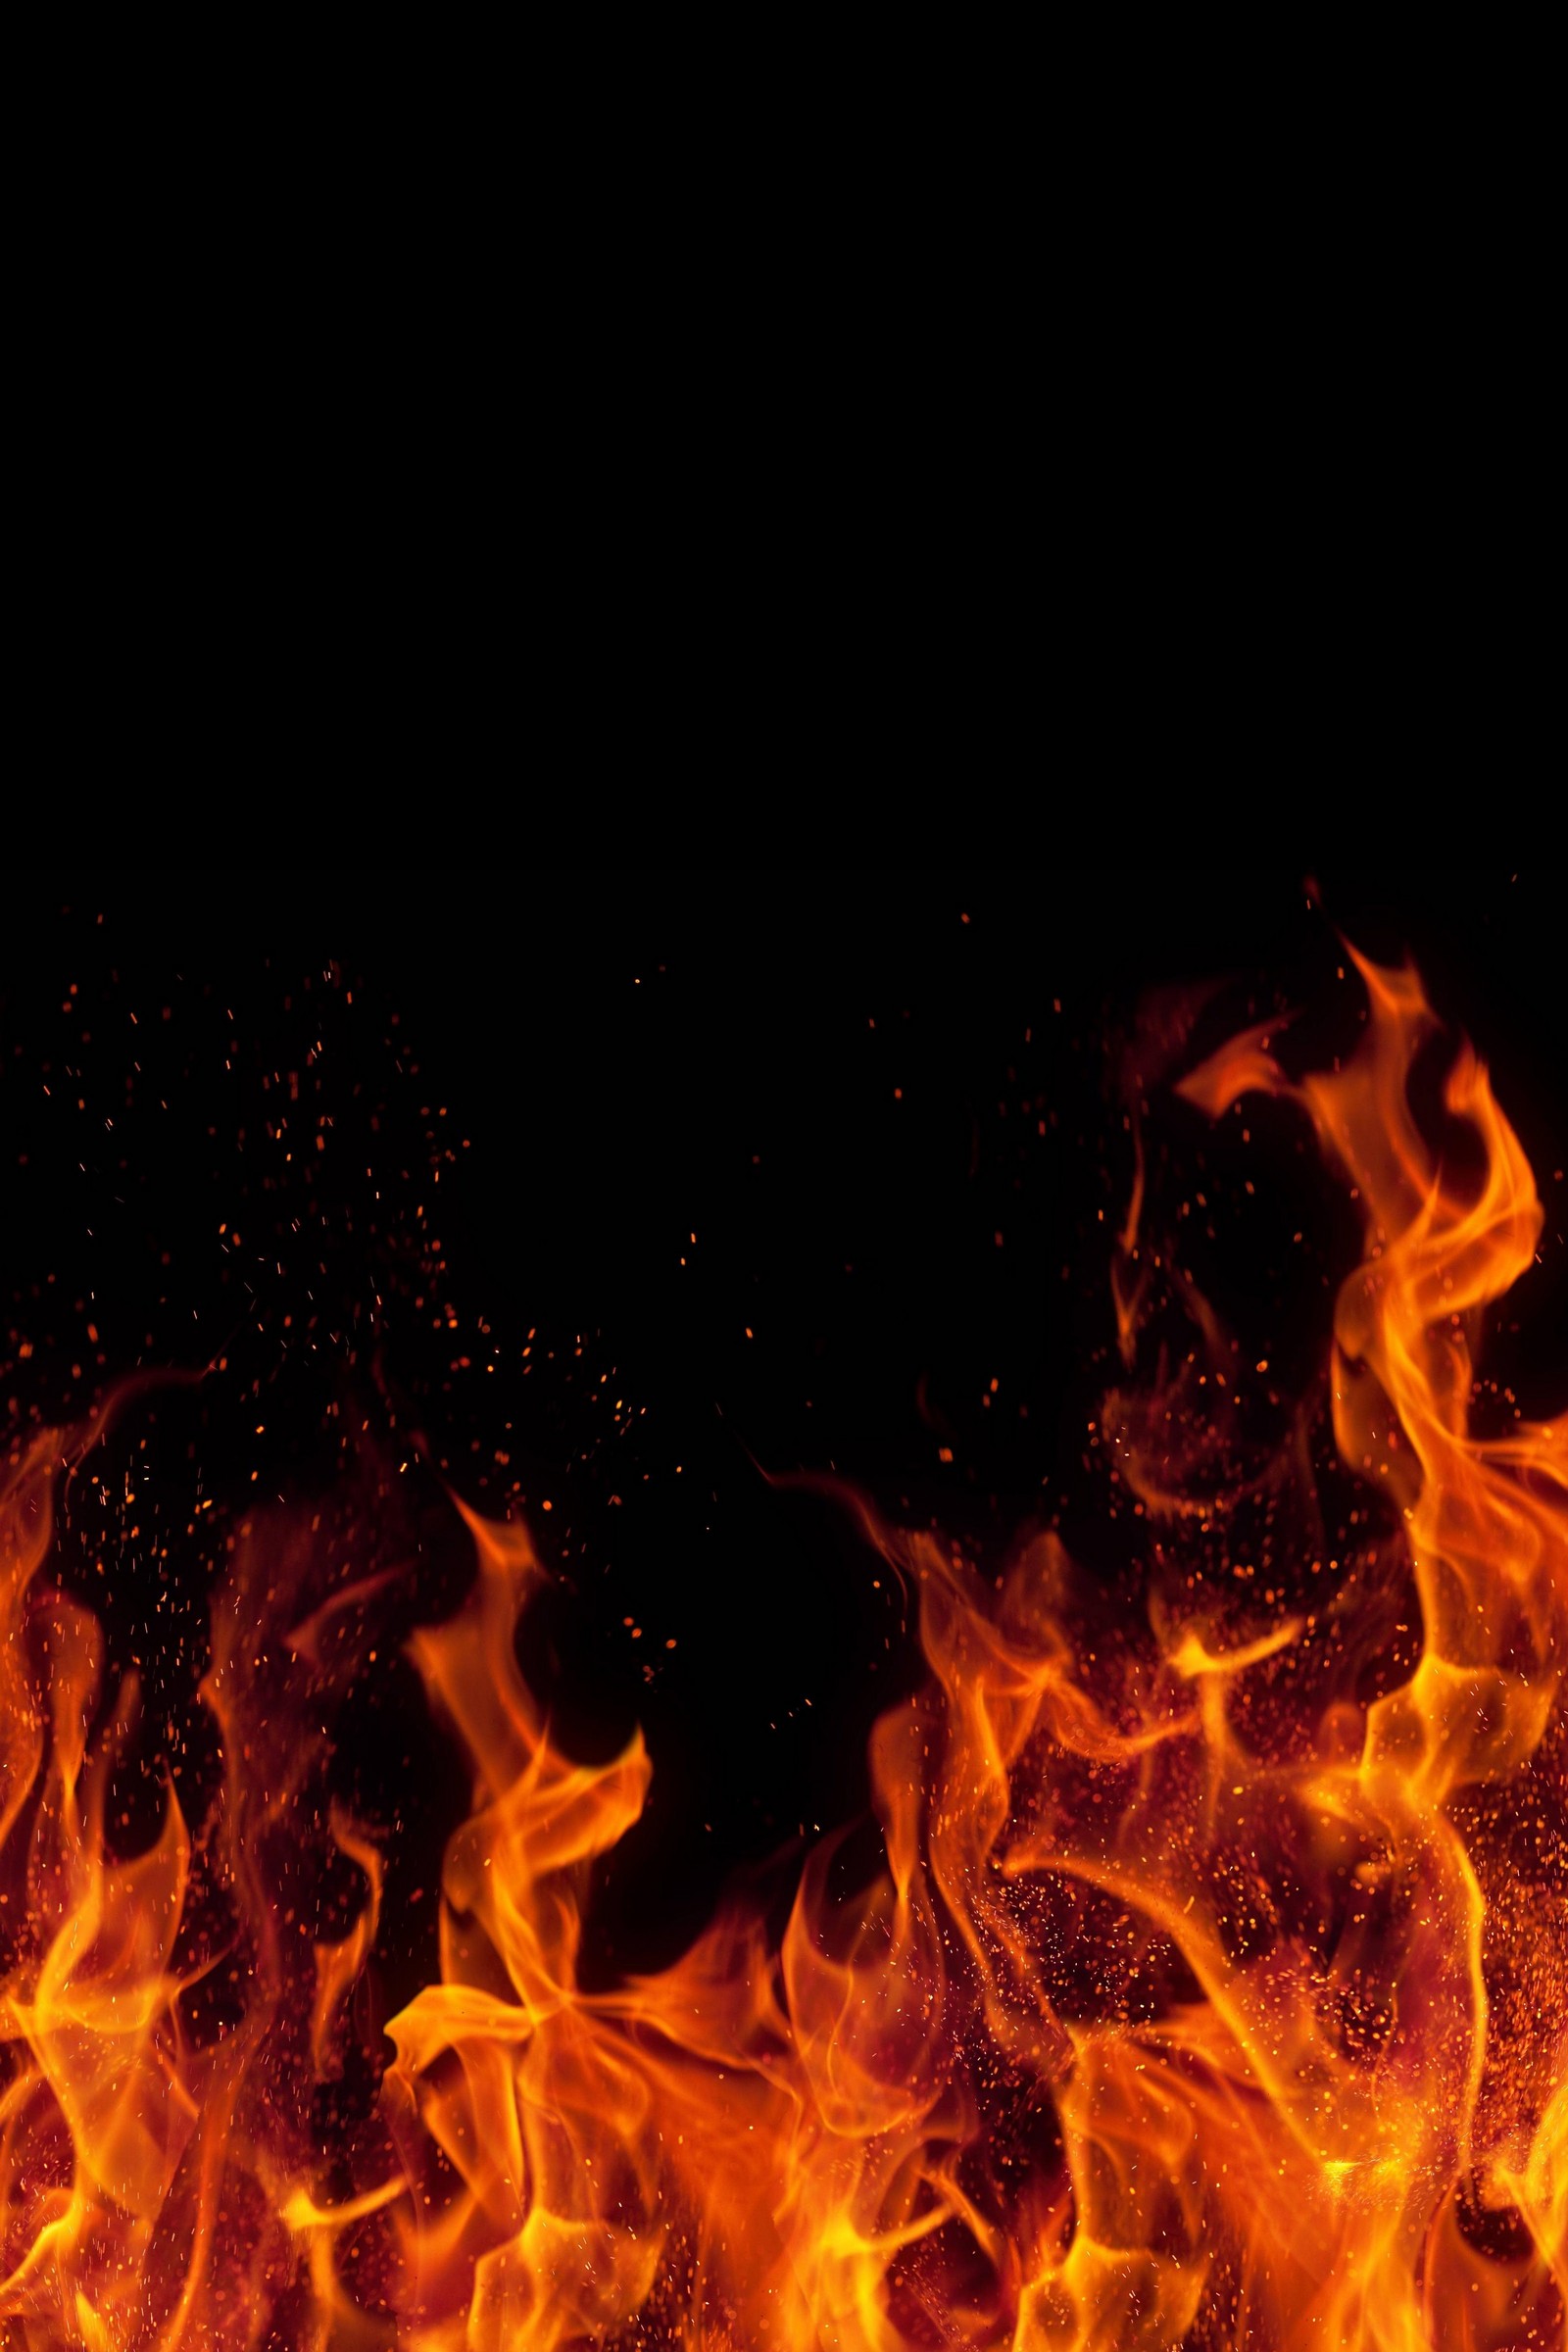 Fire Iphone Background Hd Resolution - High Resolution Flame Background - HD Wallpaper 